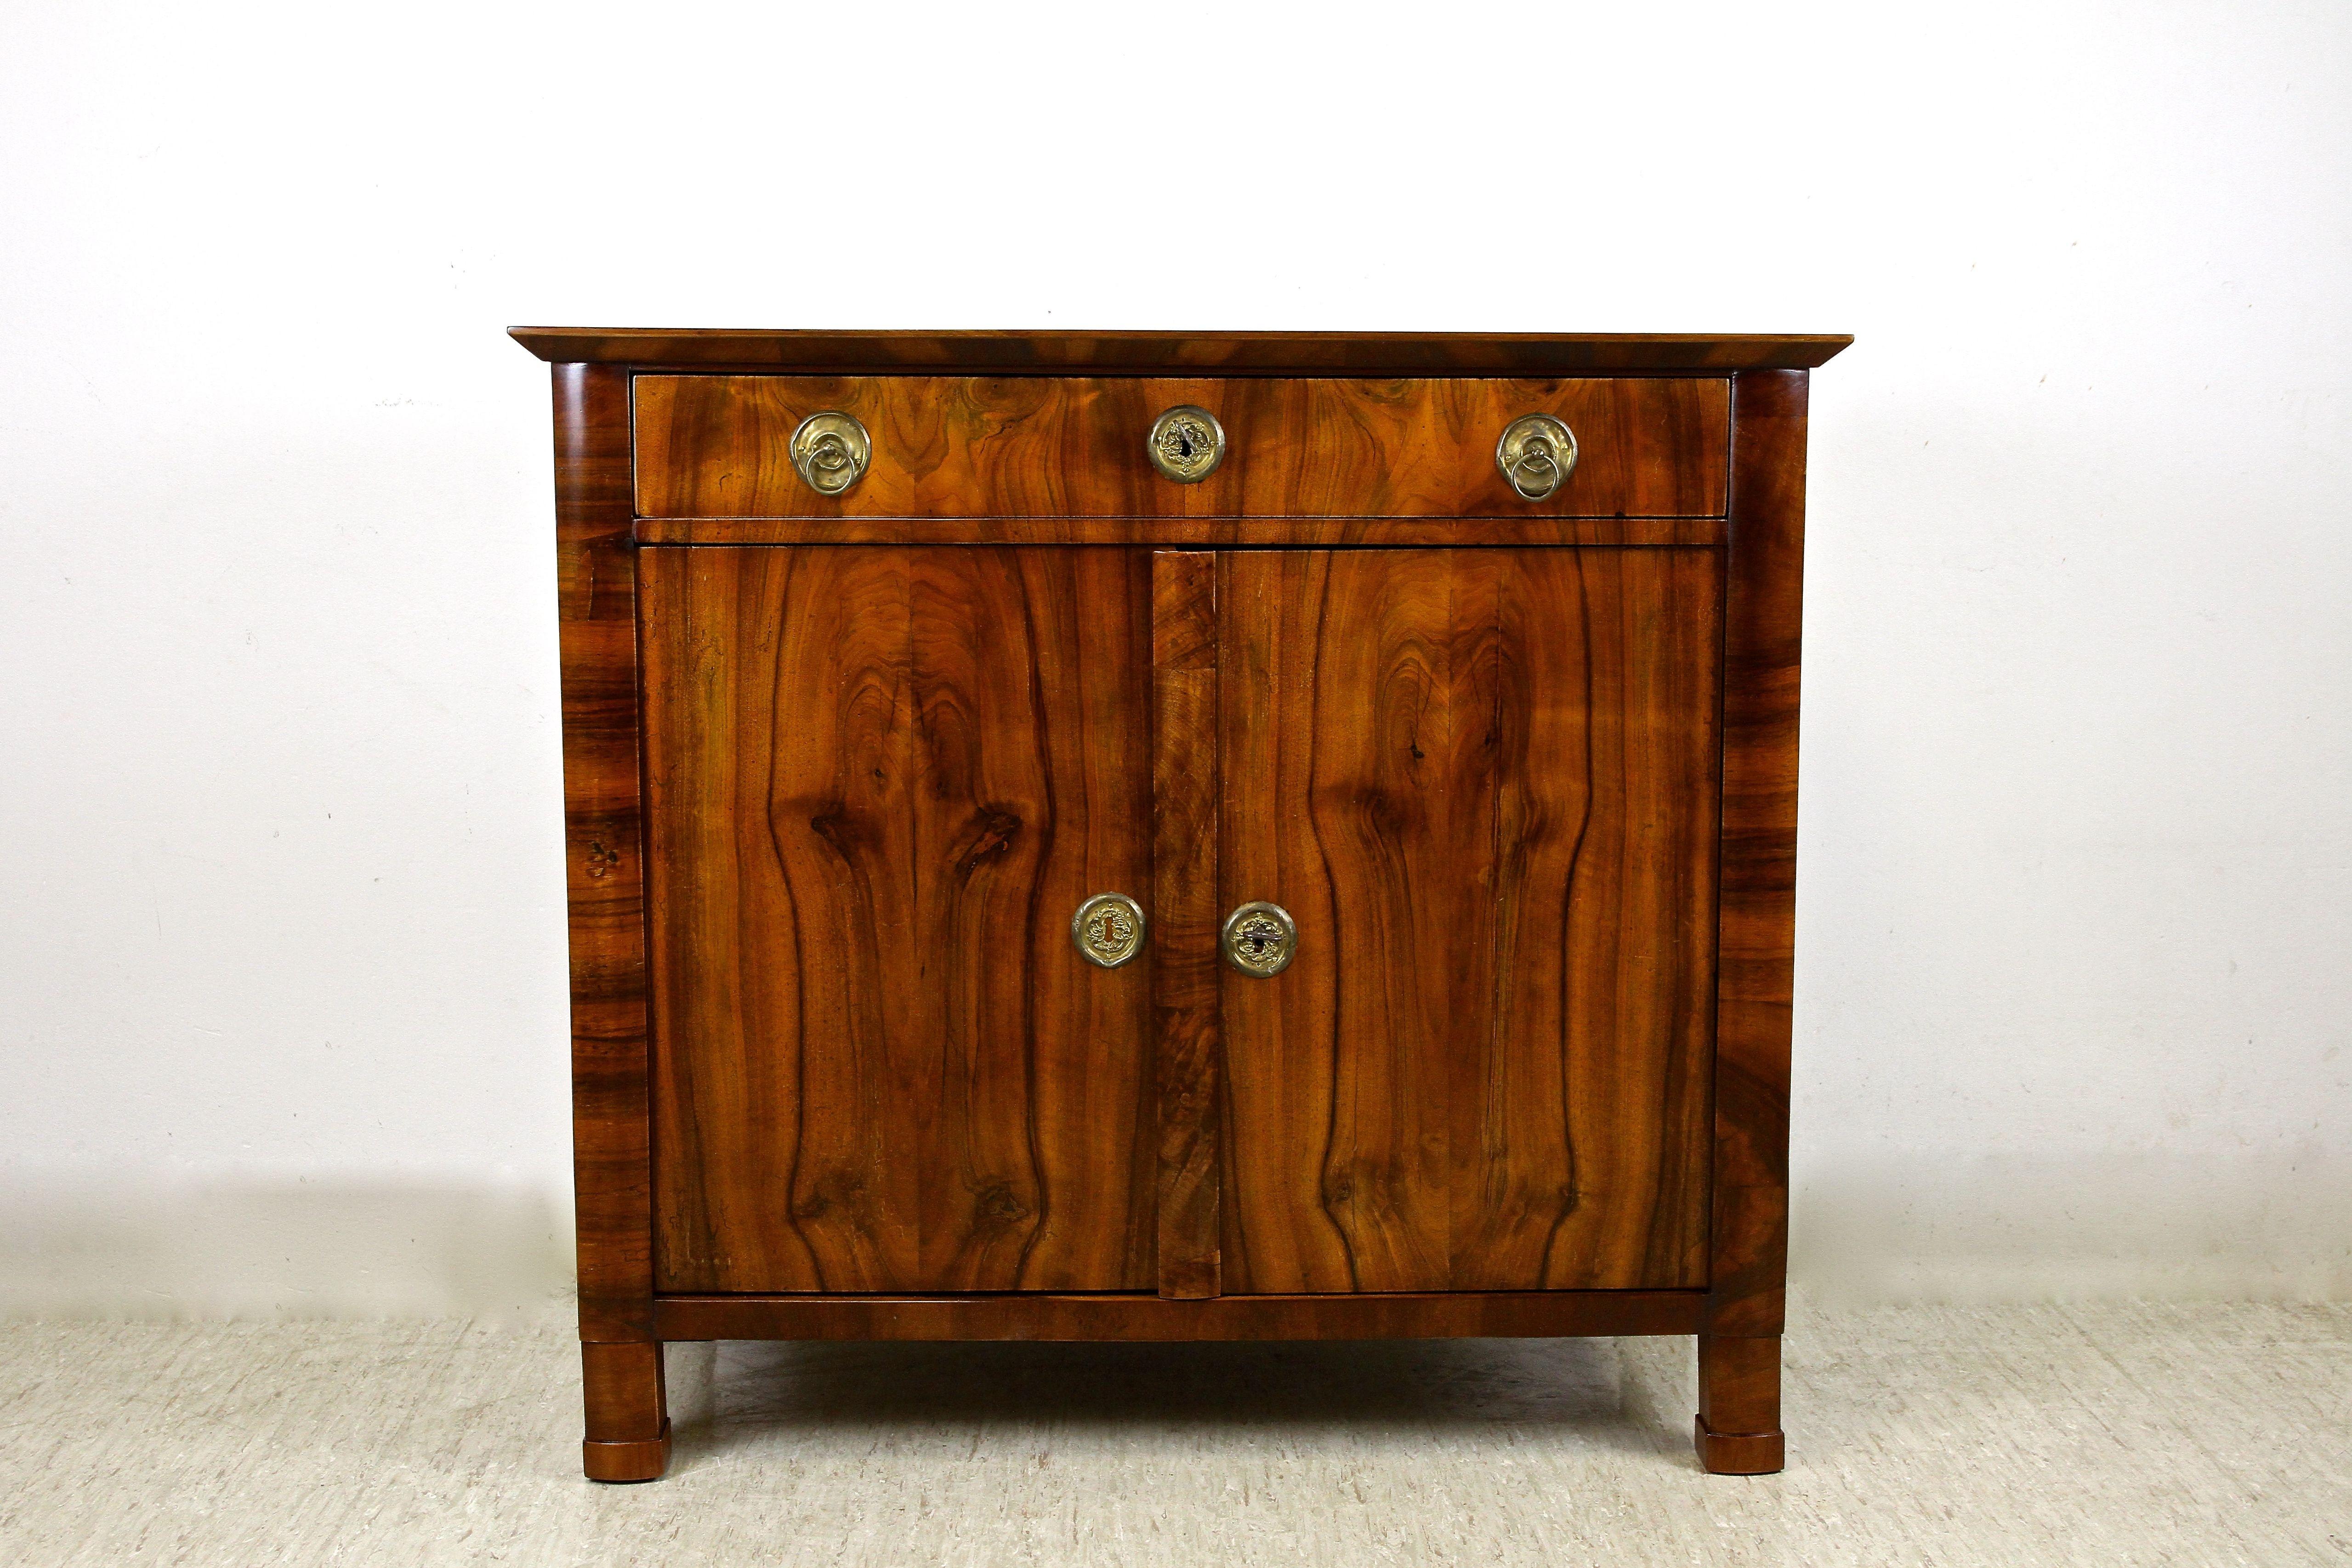 Marvellous 19th Century Nutwood Trumeau Commode from the famous Biedermeier period in Austria around 1830. Beautifully designed and constructed from spruce wood, this dresser shows a precious mirrormatched nutwood veneered surface, impressing with a